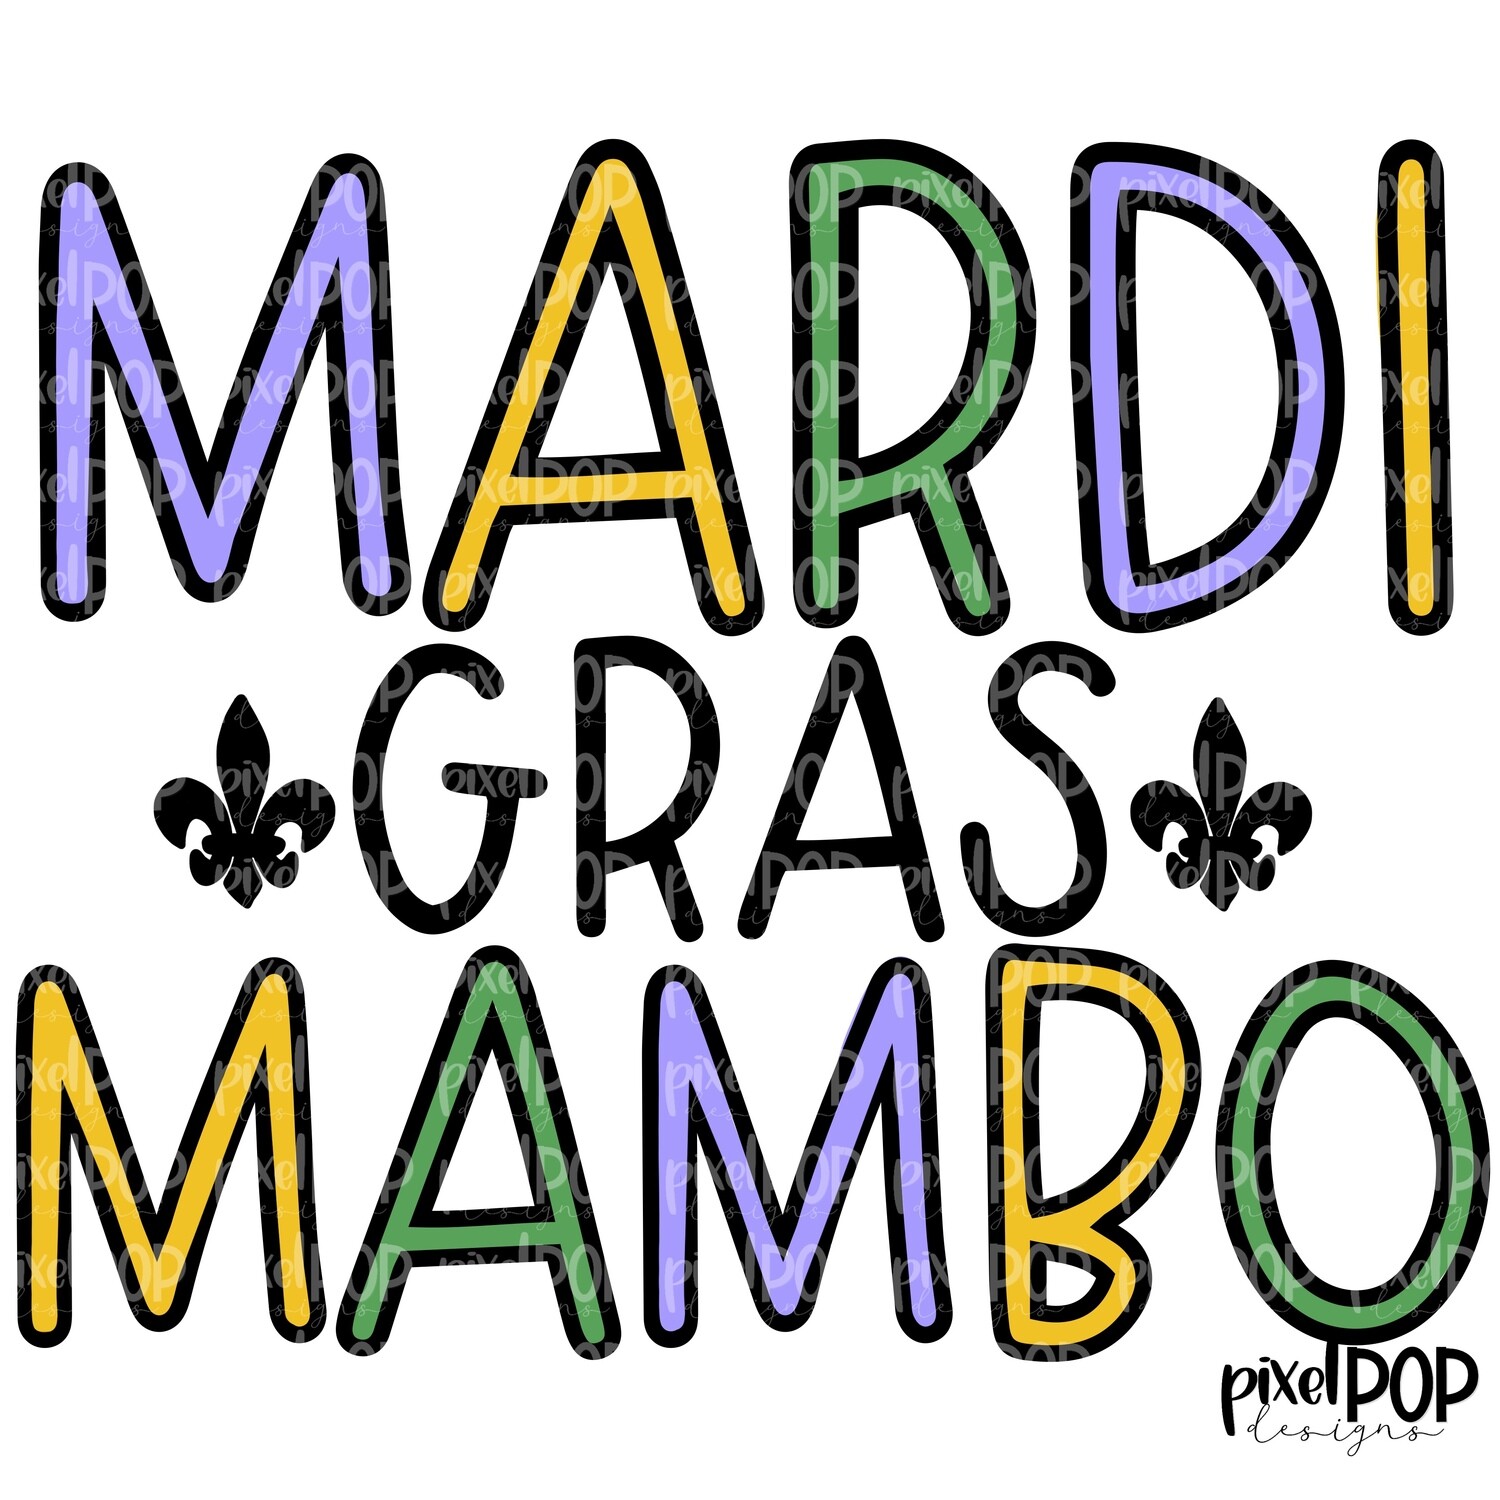 Mardi Gras Mambo Simple Fat Tuesday Art Sublimation PNG | New Orleans Art | Hand Painted Design | Mardi Gras Design | Digital Download